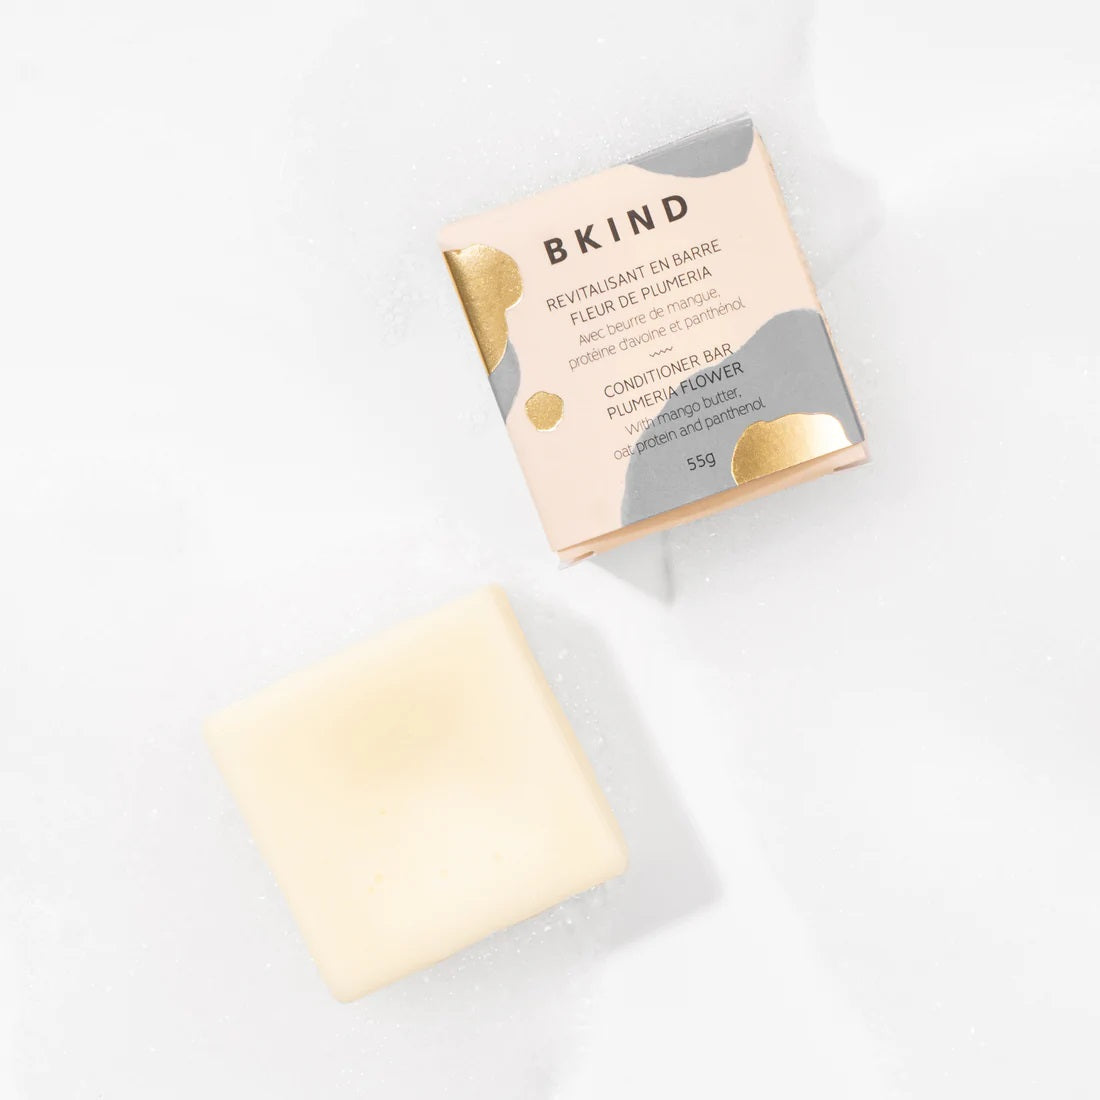 BKIND Conditioner Bar Coily and curly hair